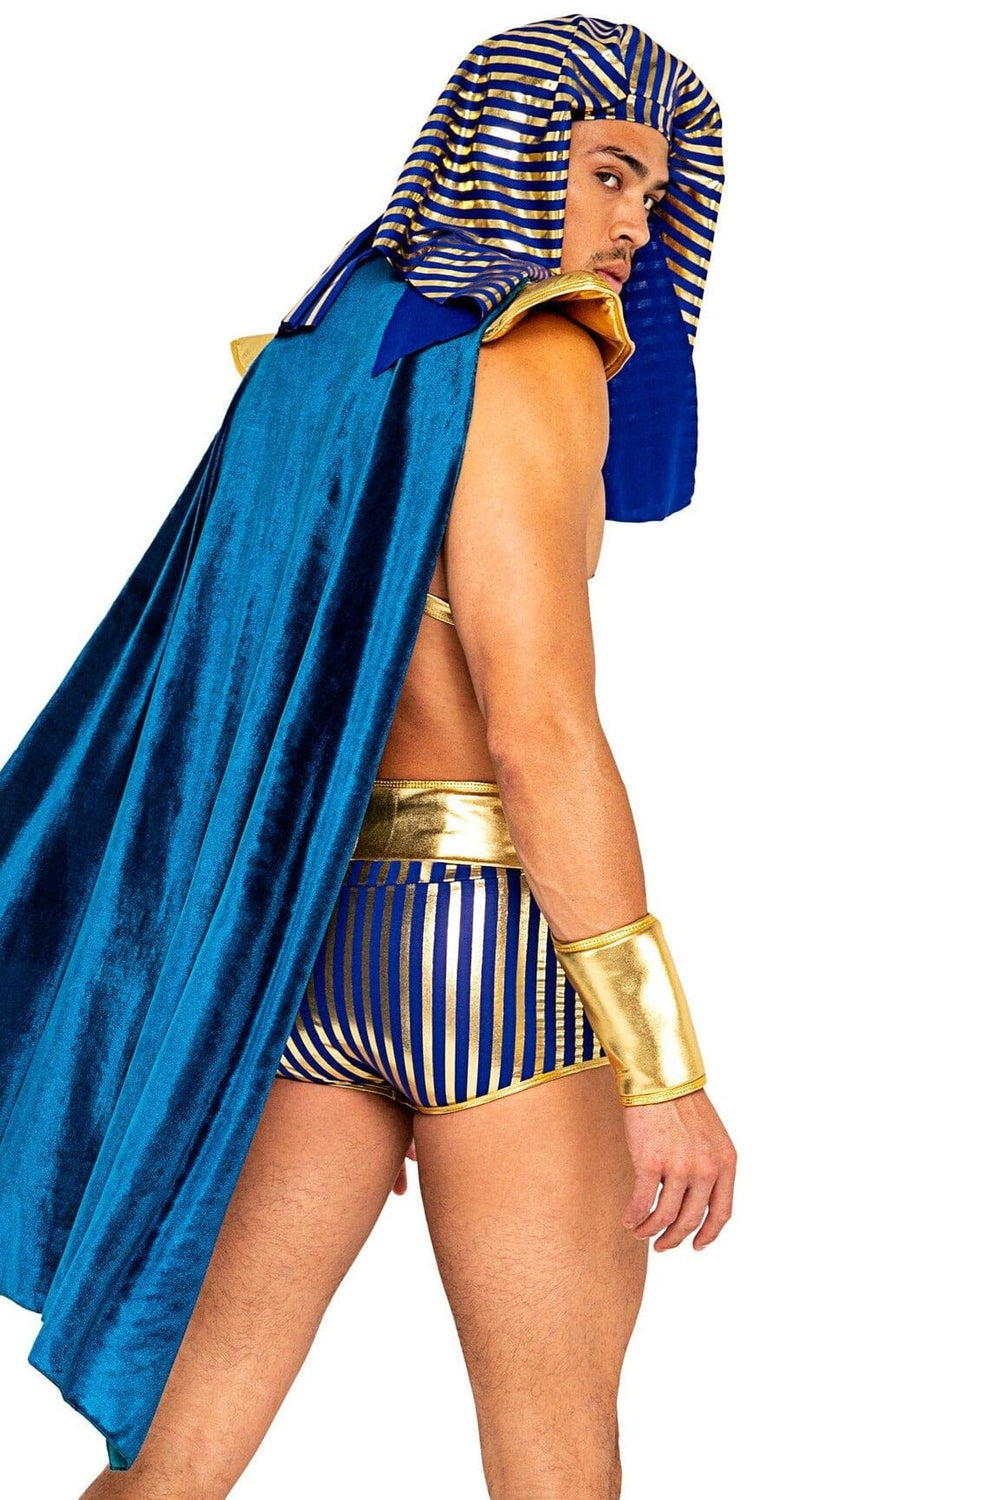 5pc Mens King Pharaoh of Egypt-Other Costumes-Roma Costumes-SEXYSHOES.COM